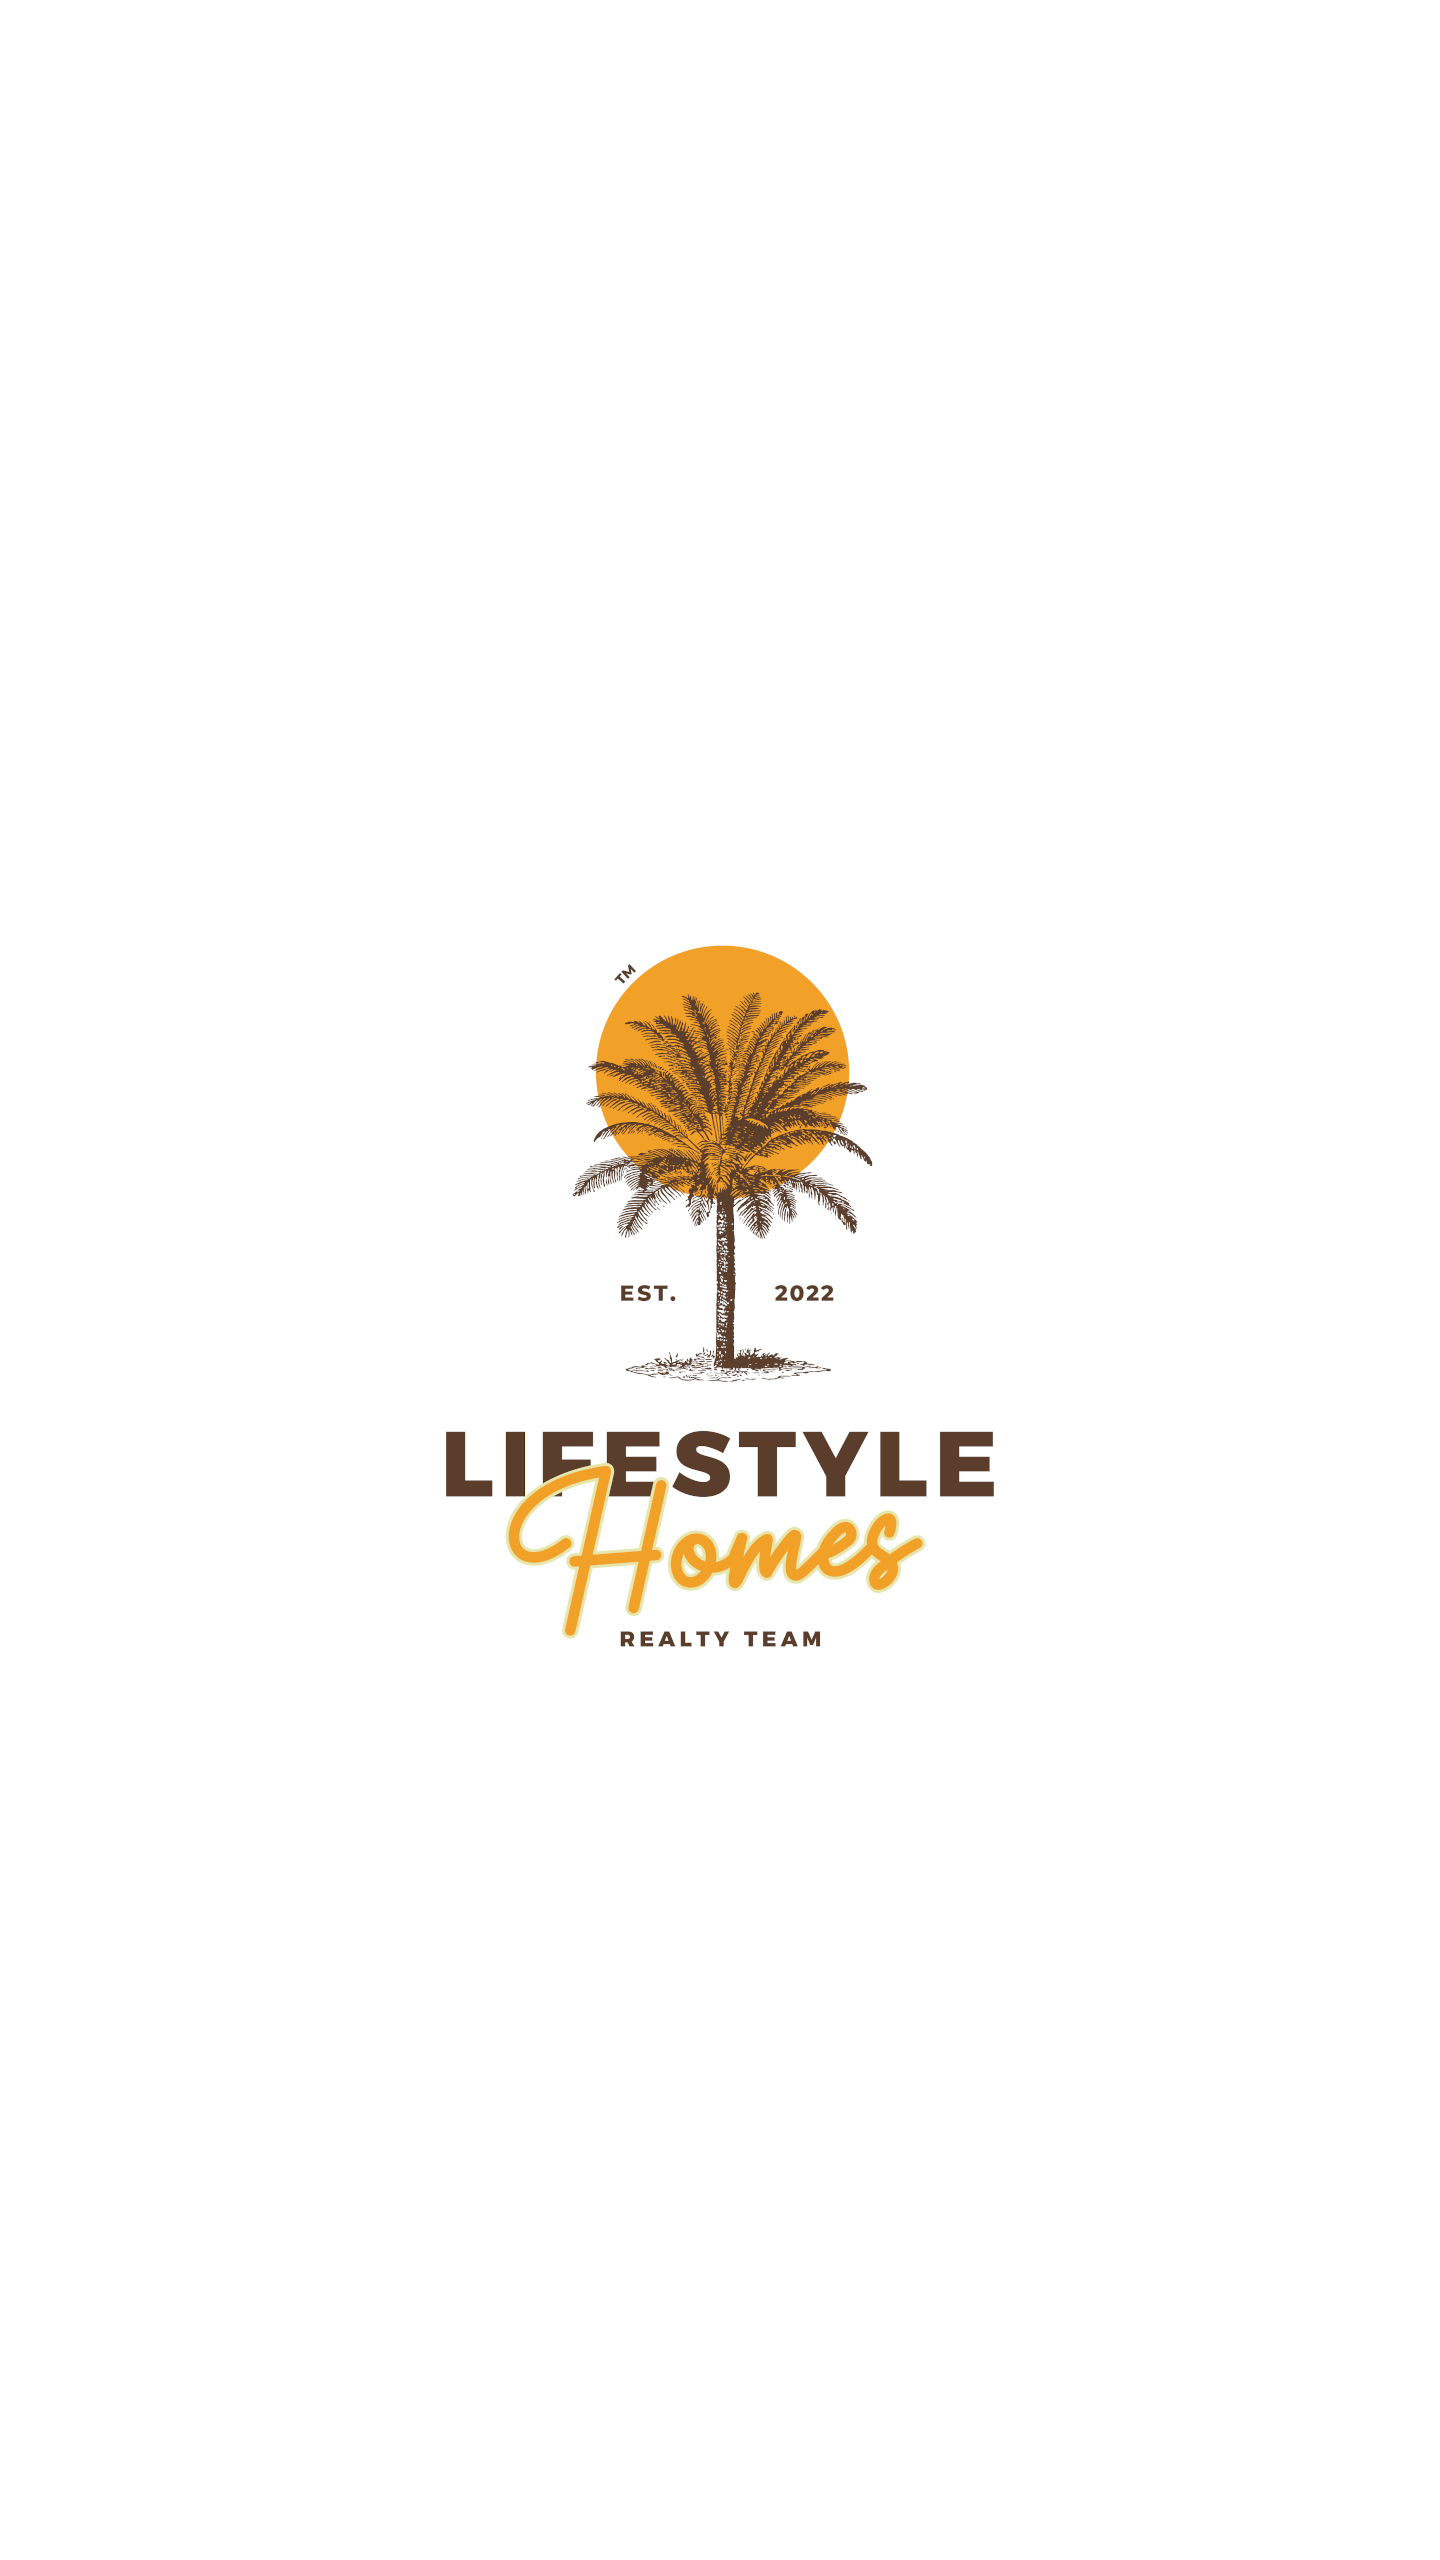 LIFE STYLE HOMES